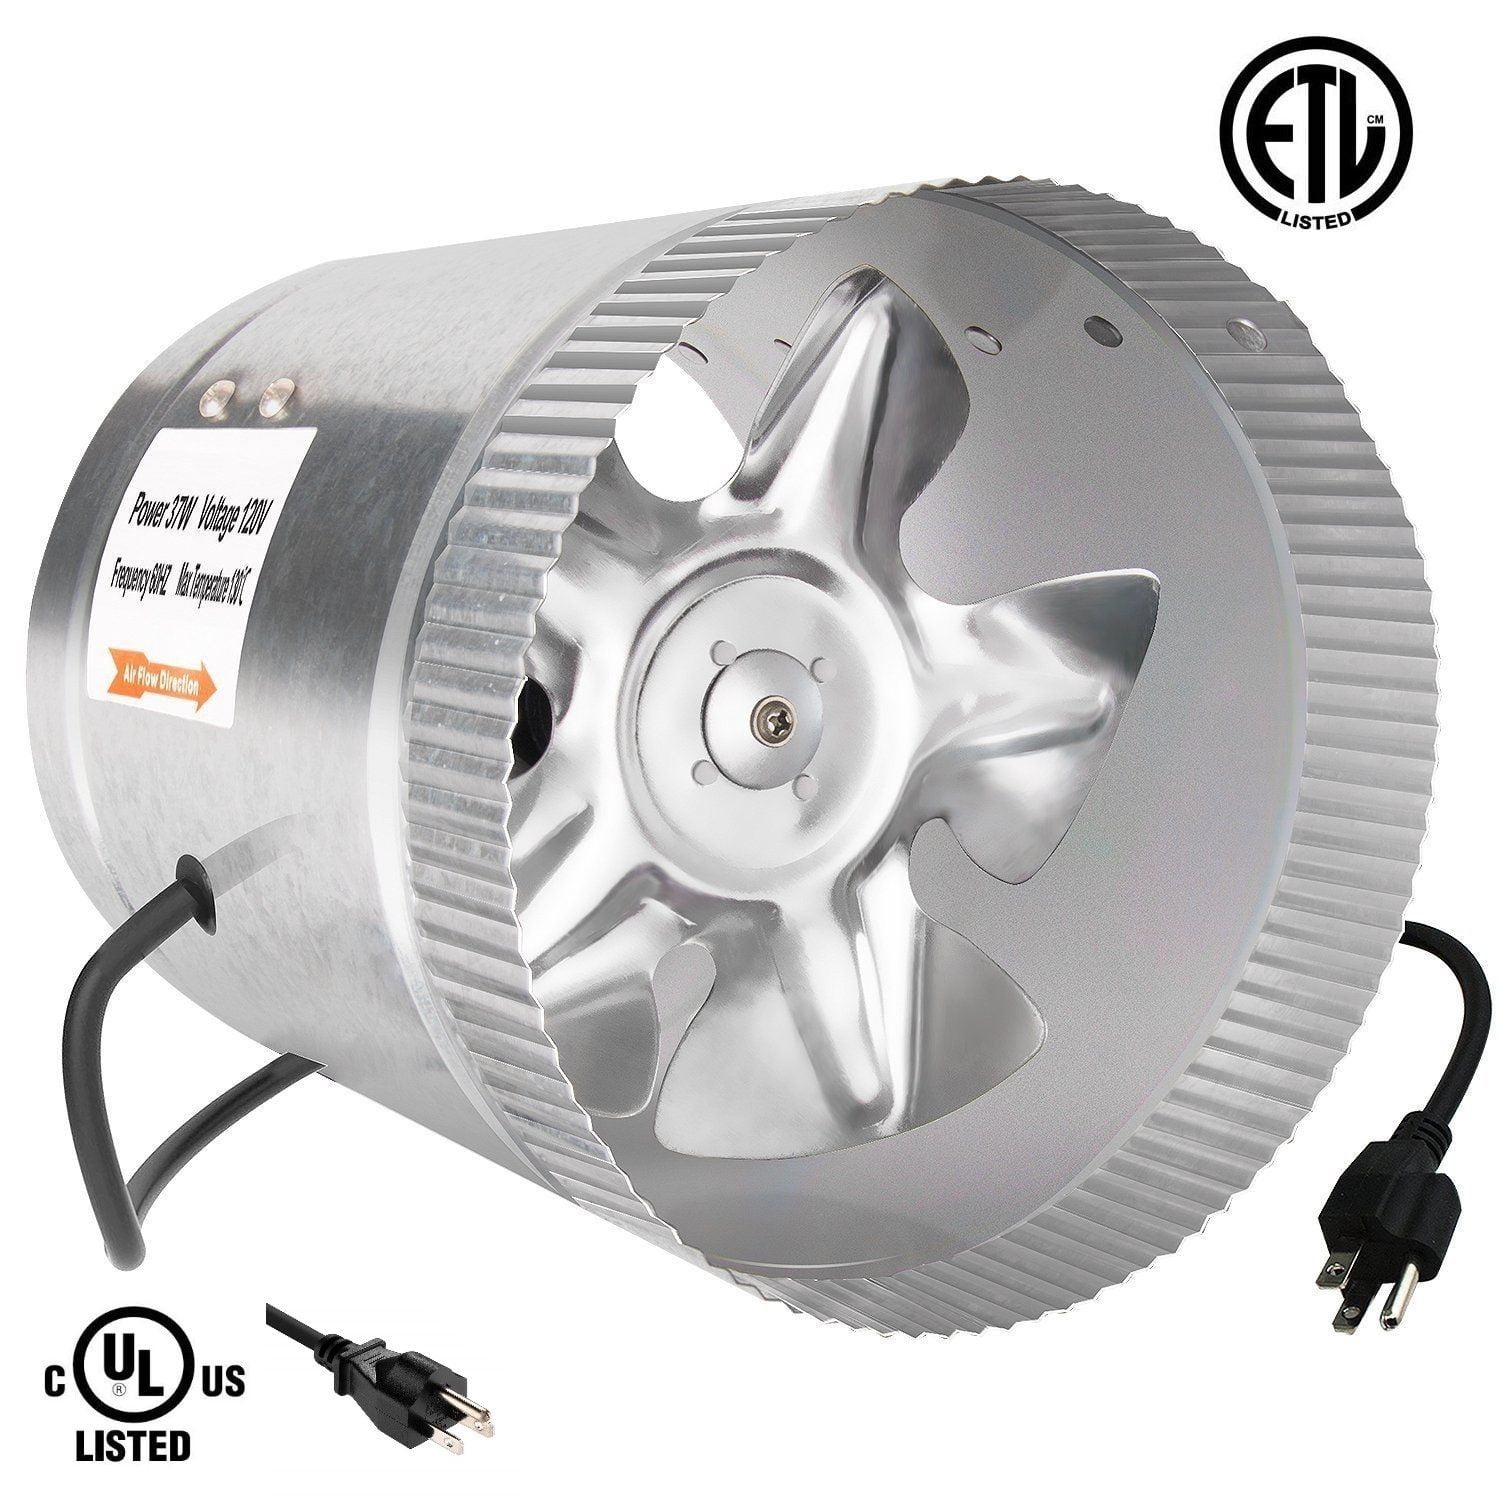 iPower 4 inch 100 CFM Booster Fan Inline Duct Vent Blower with Variable Speed Controller Adjuster, Intake 5.5' Grounded Power Cord for HVAC Exhaust, L